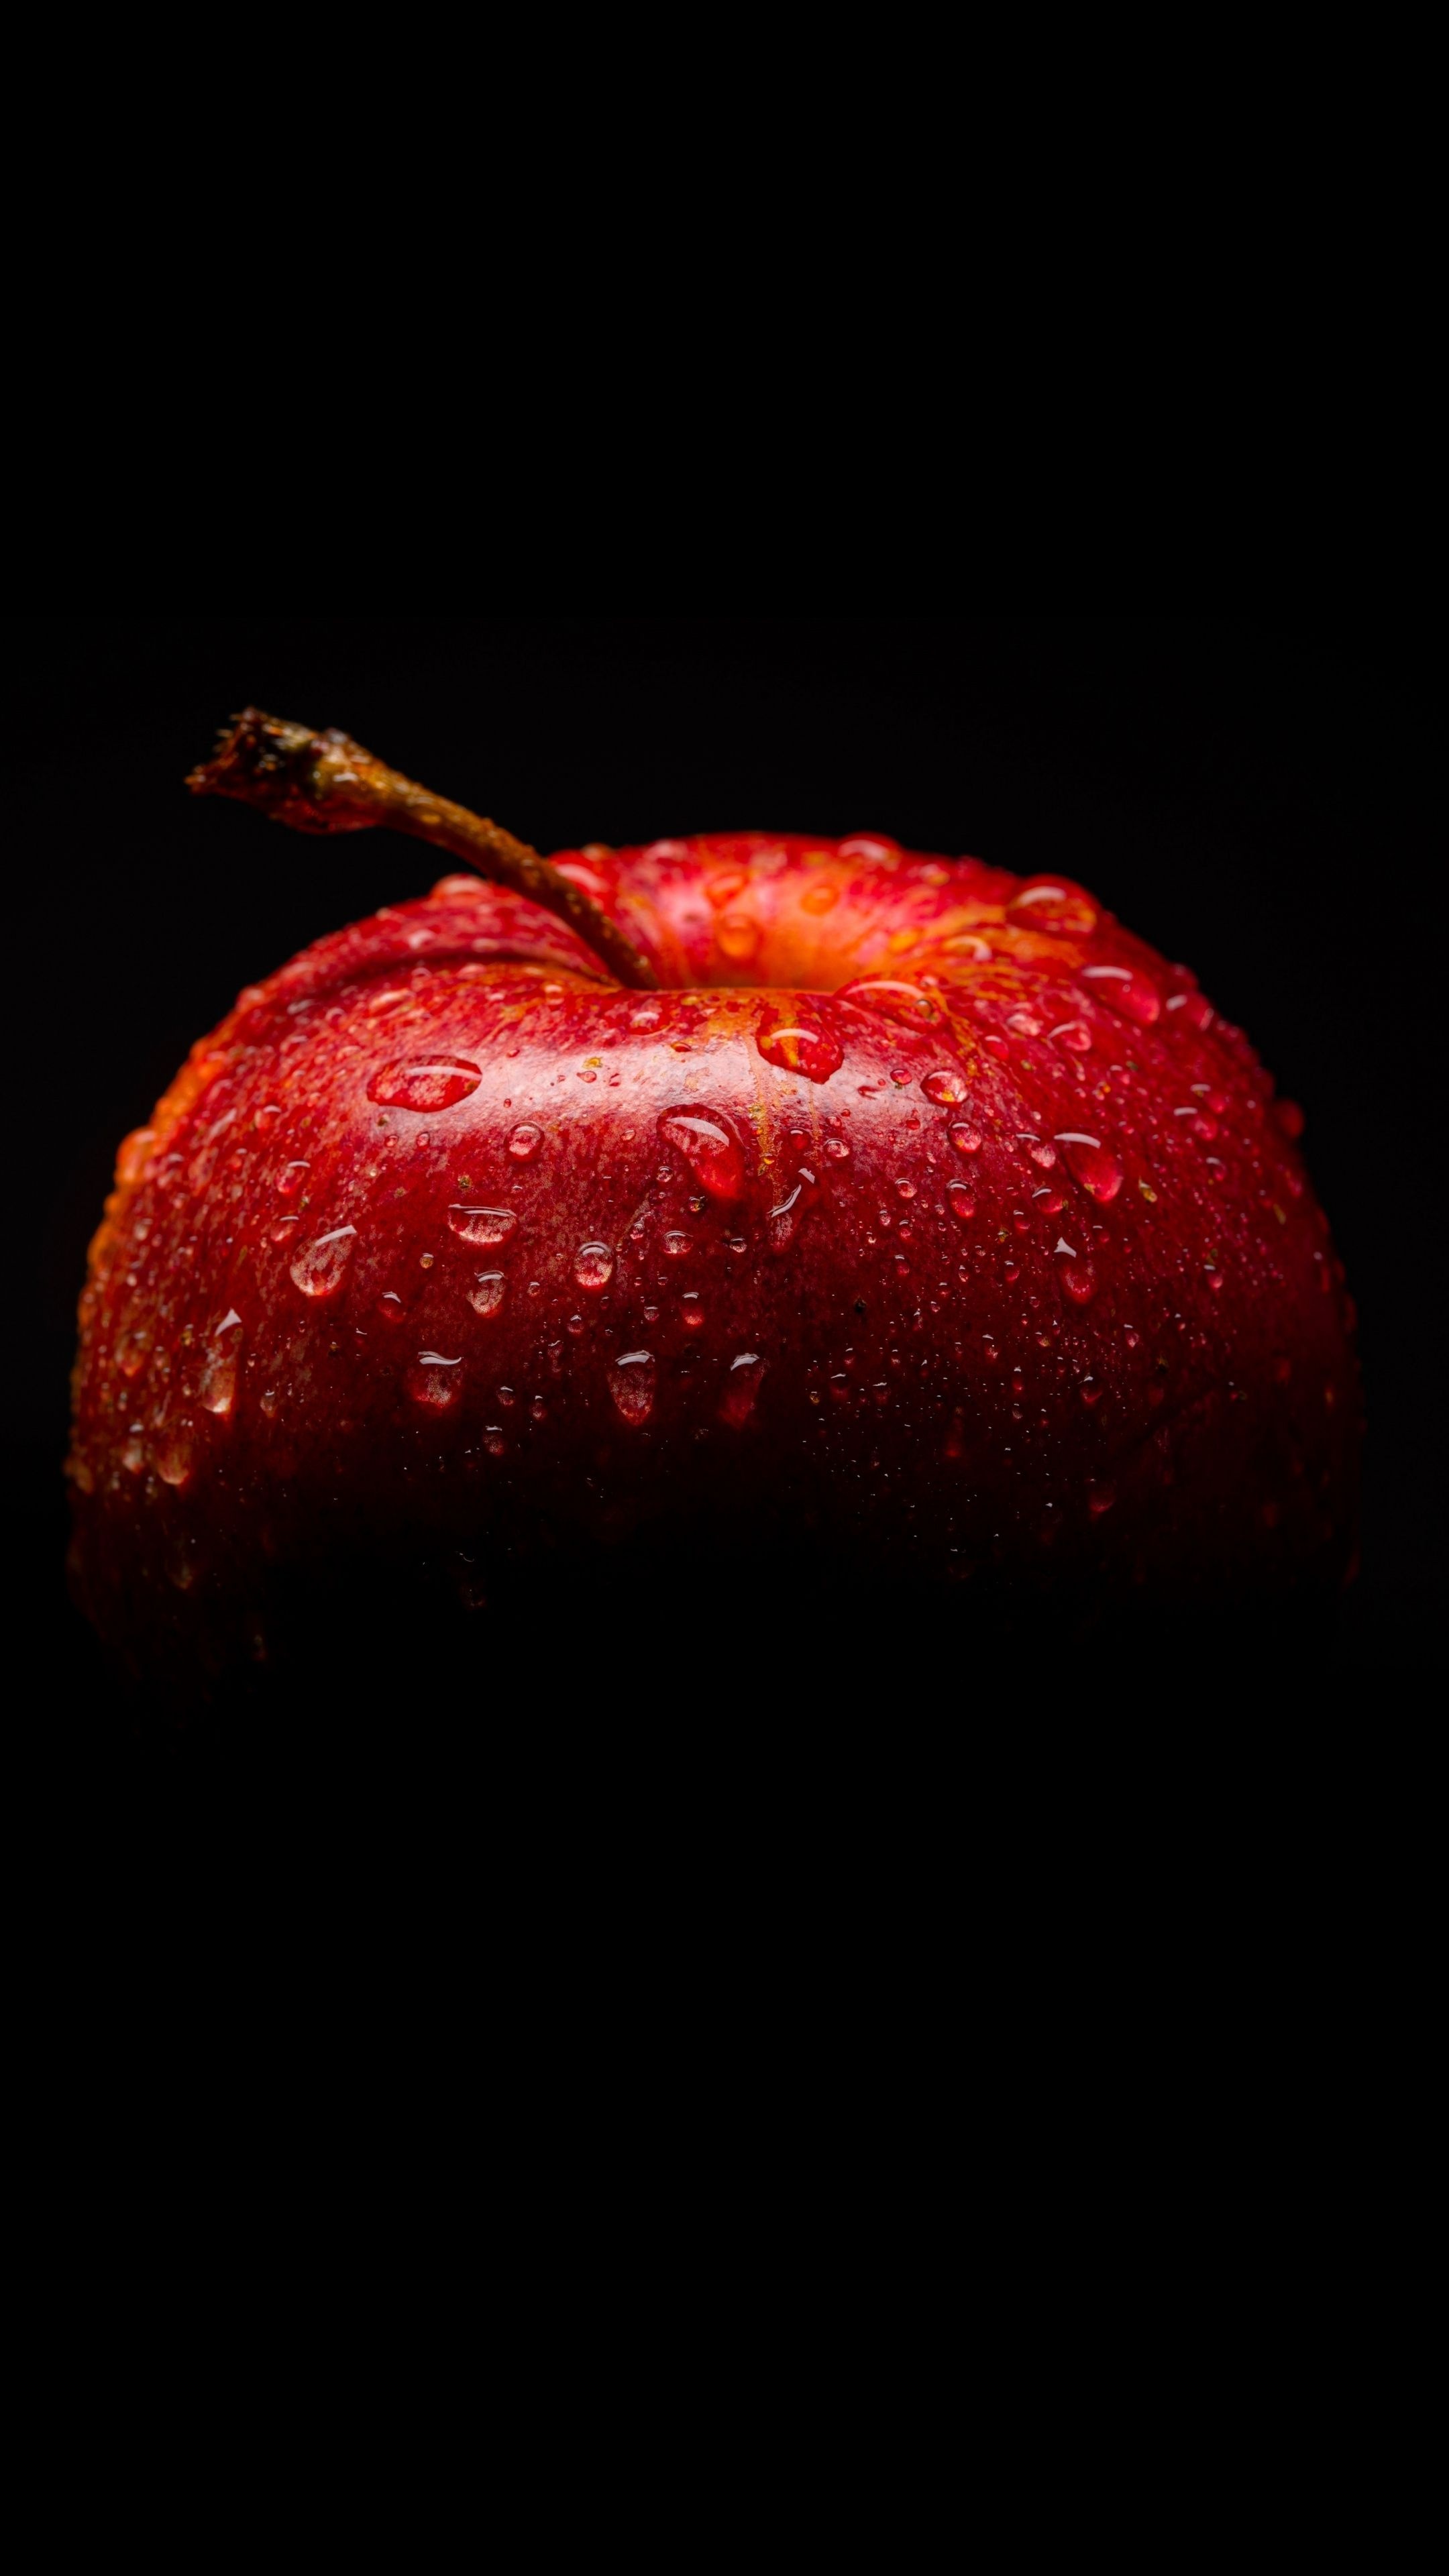 Red fresh apple, Wallpaper, Close-up, Healthy snack, 2160x3840 4K Handy